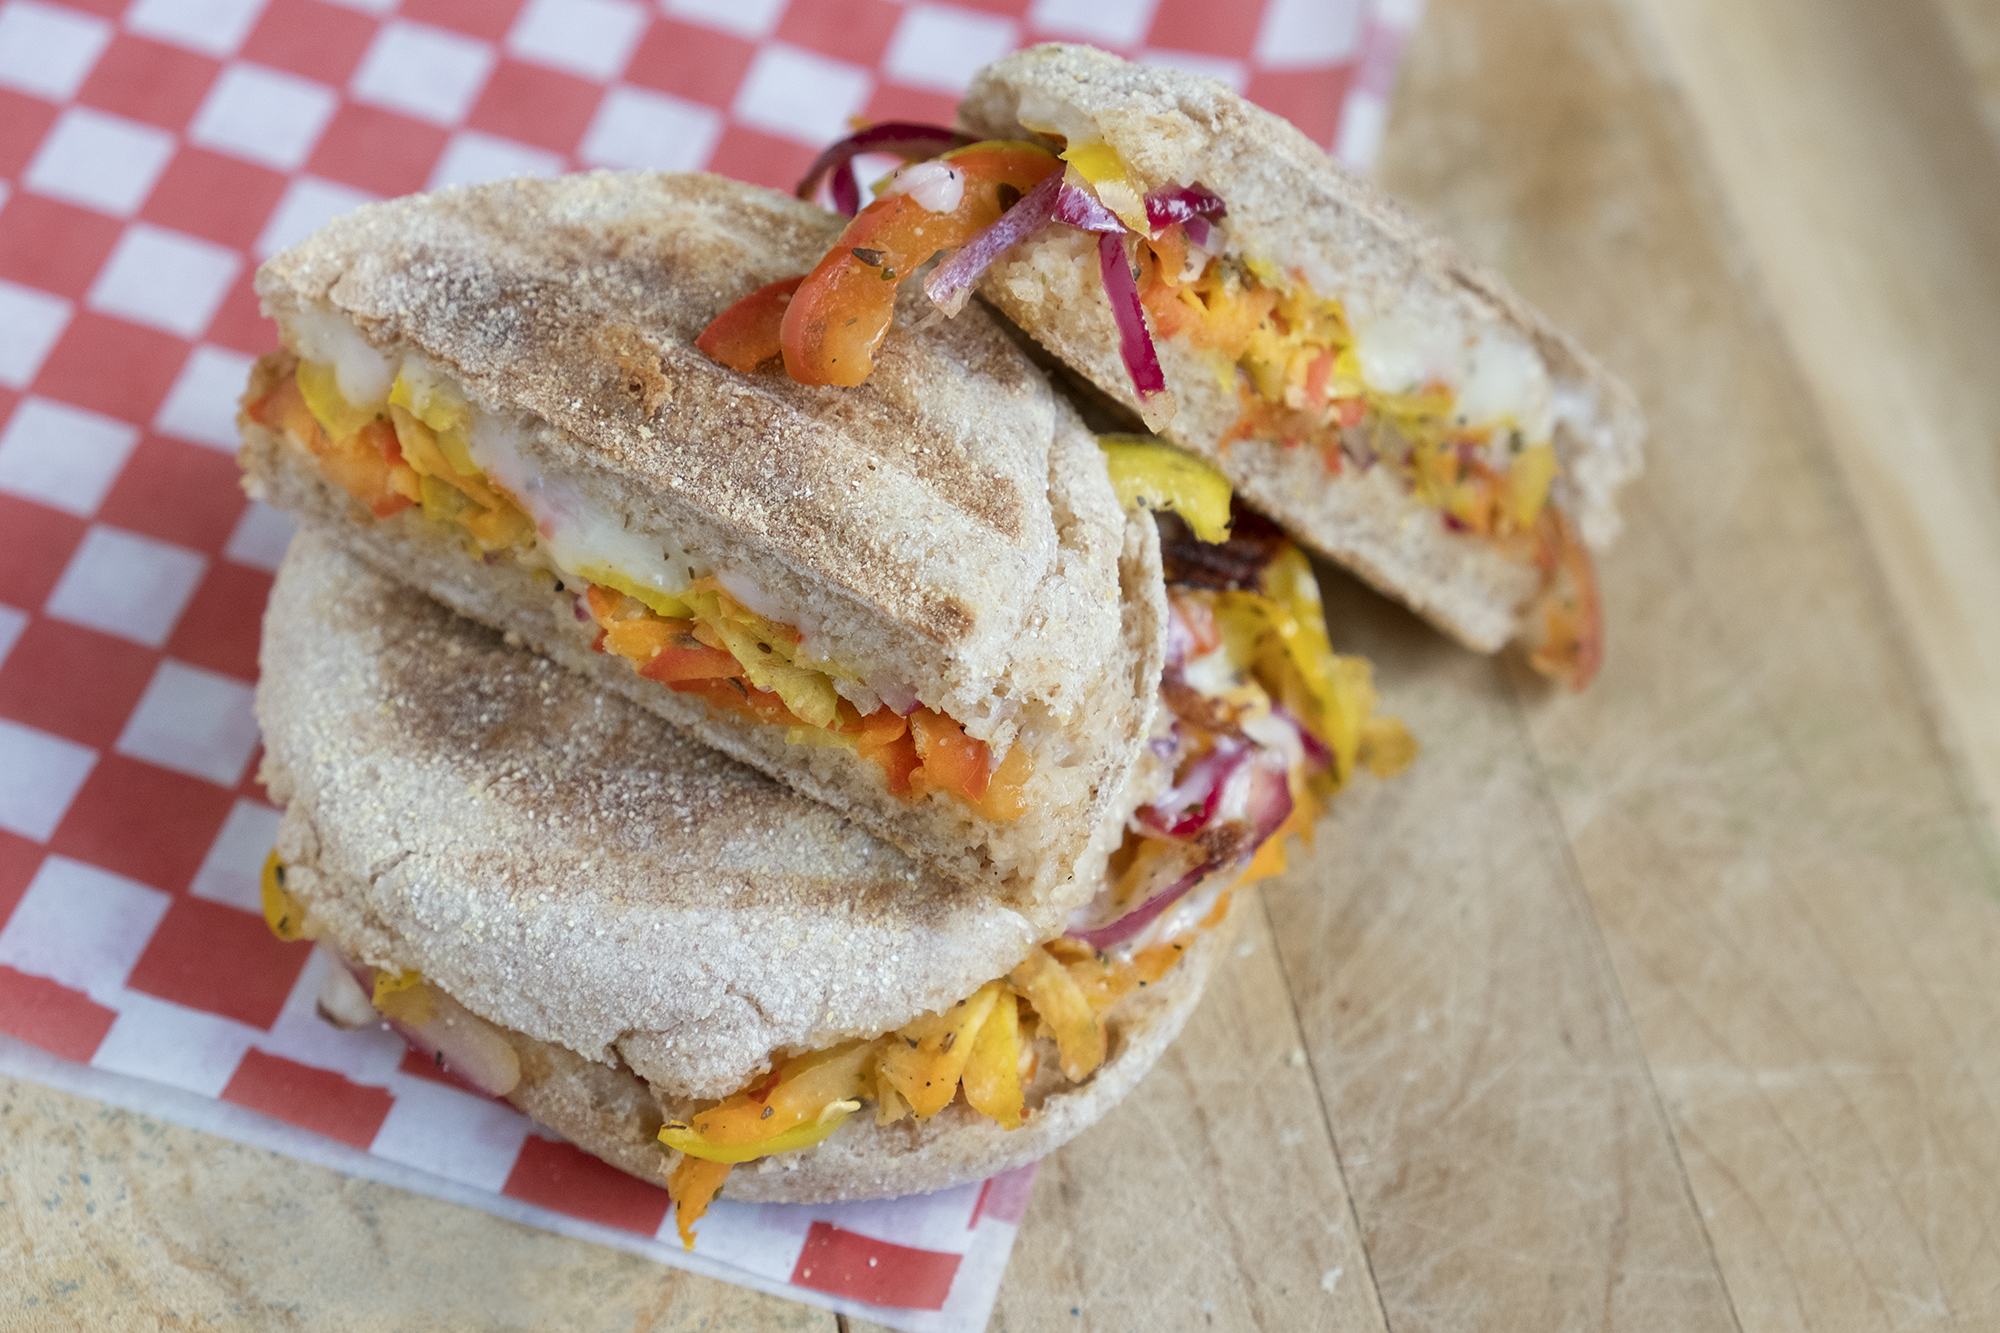 Forget just breakfast, this English Muffin Arepa is so good you will want to eat it for breakfast, lunch & dinner!